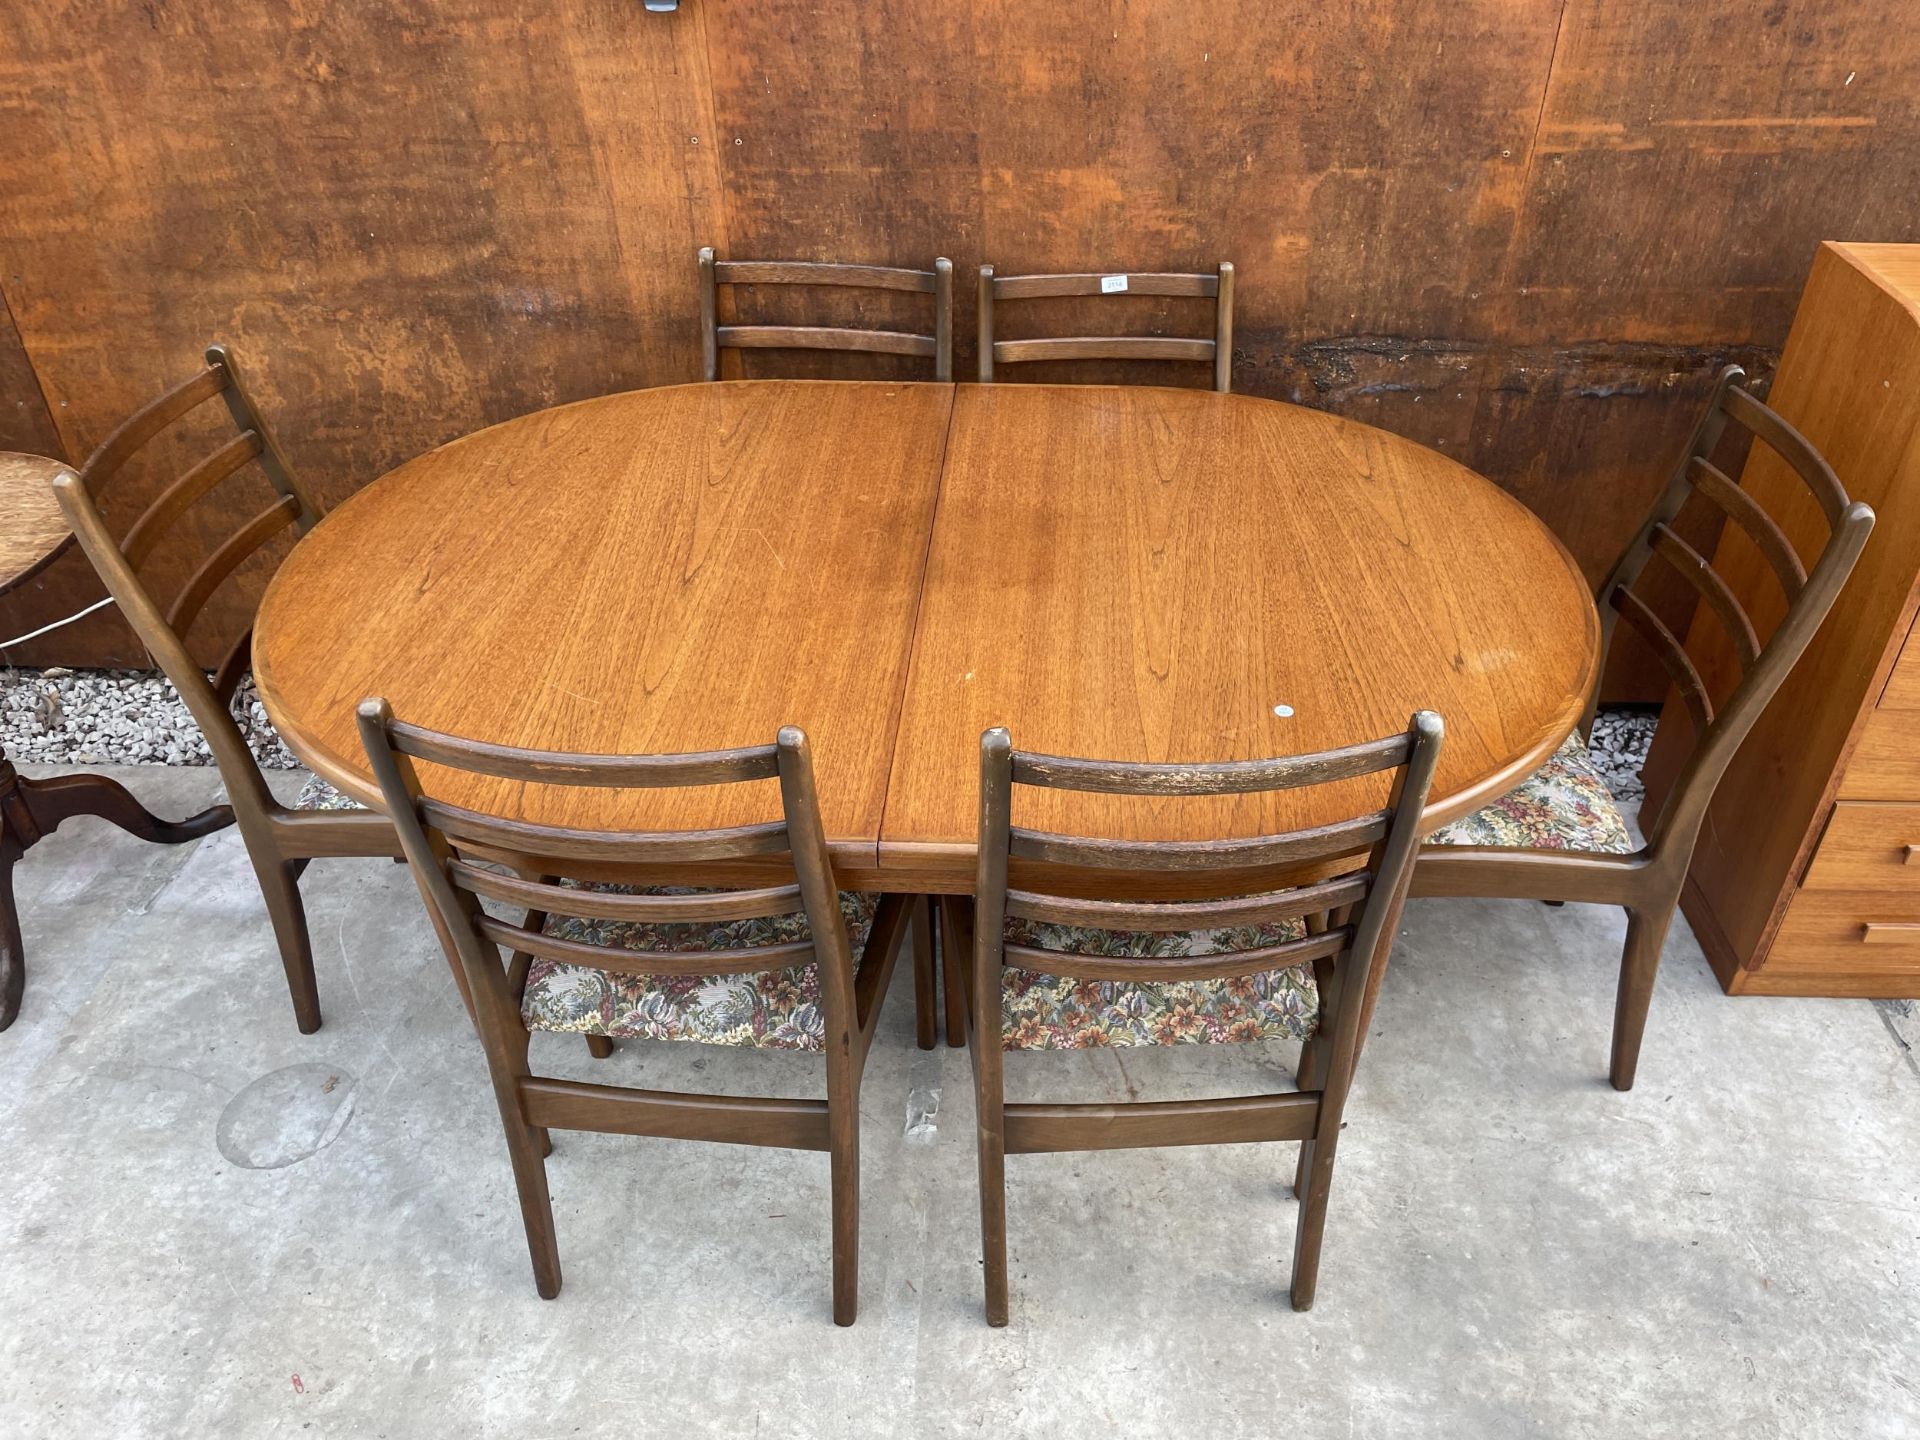 A G-PLAN RETRO TEAK EXTENDING DINING TABLE, 64 X 44" (LEAF 18") AND SIX LADDERBACK DINING CHAIRS